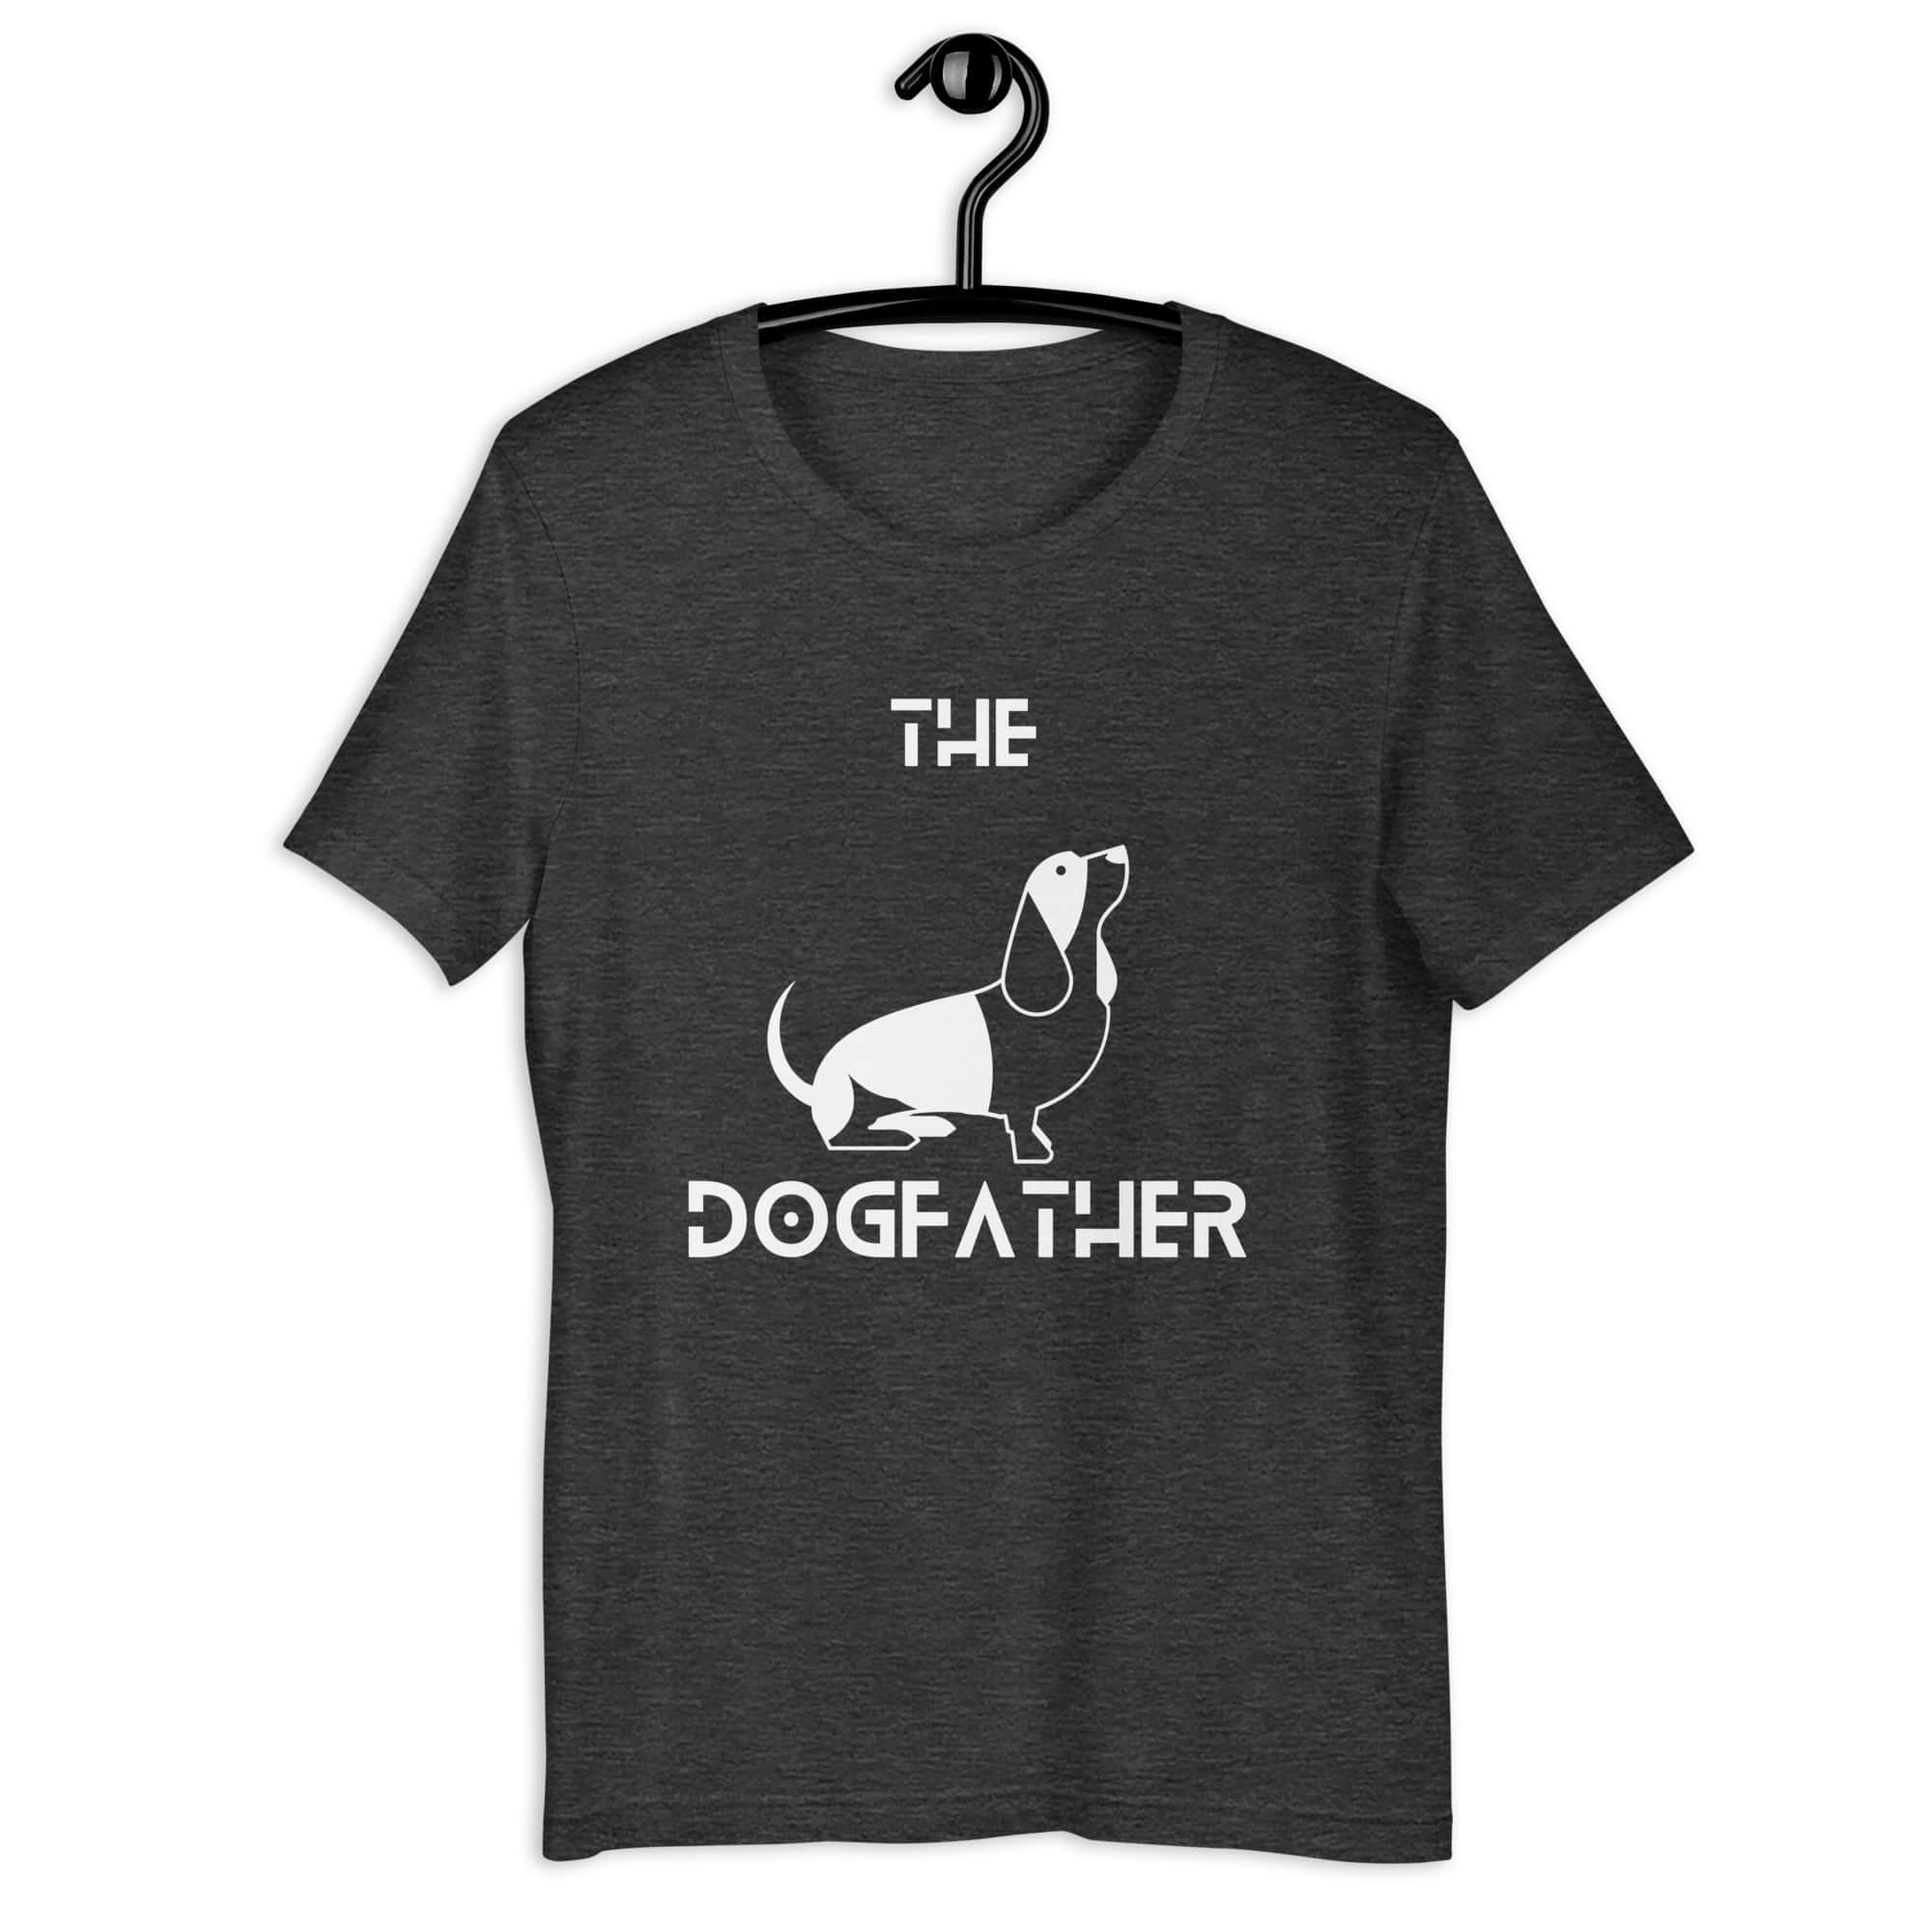 The Dogfather Hounds Unisex T-Shirt. Dark Grey